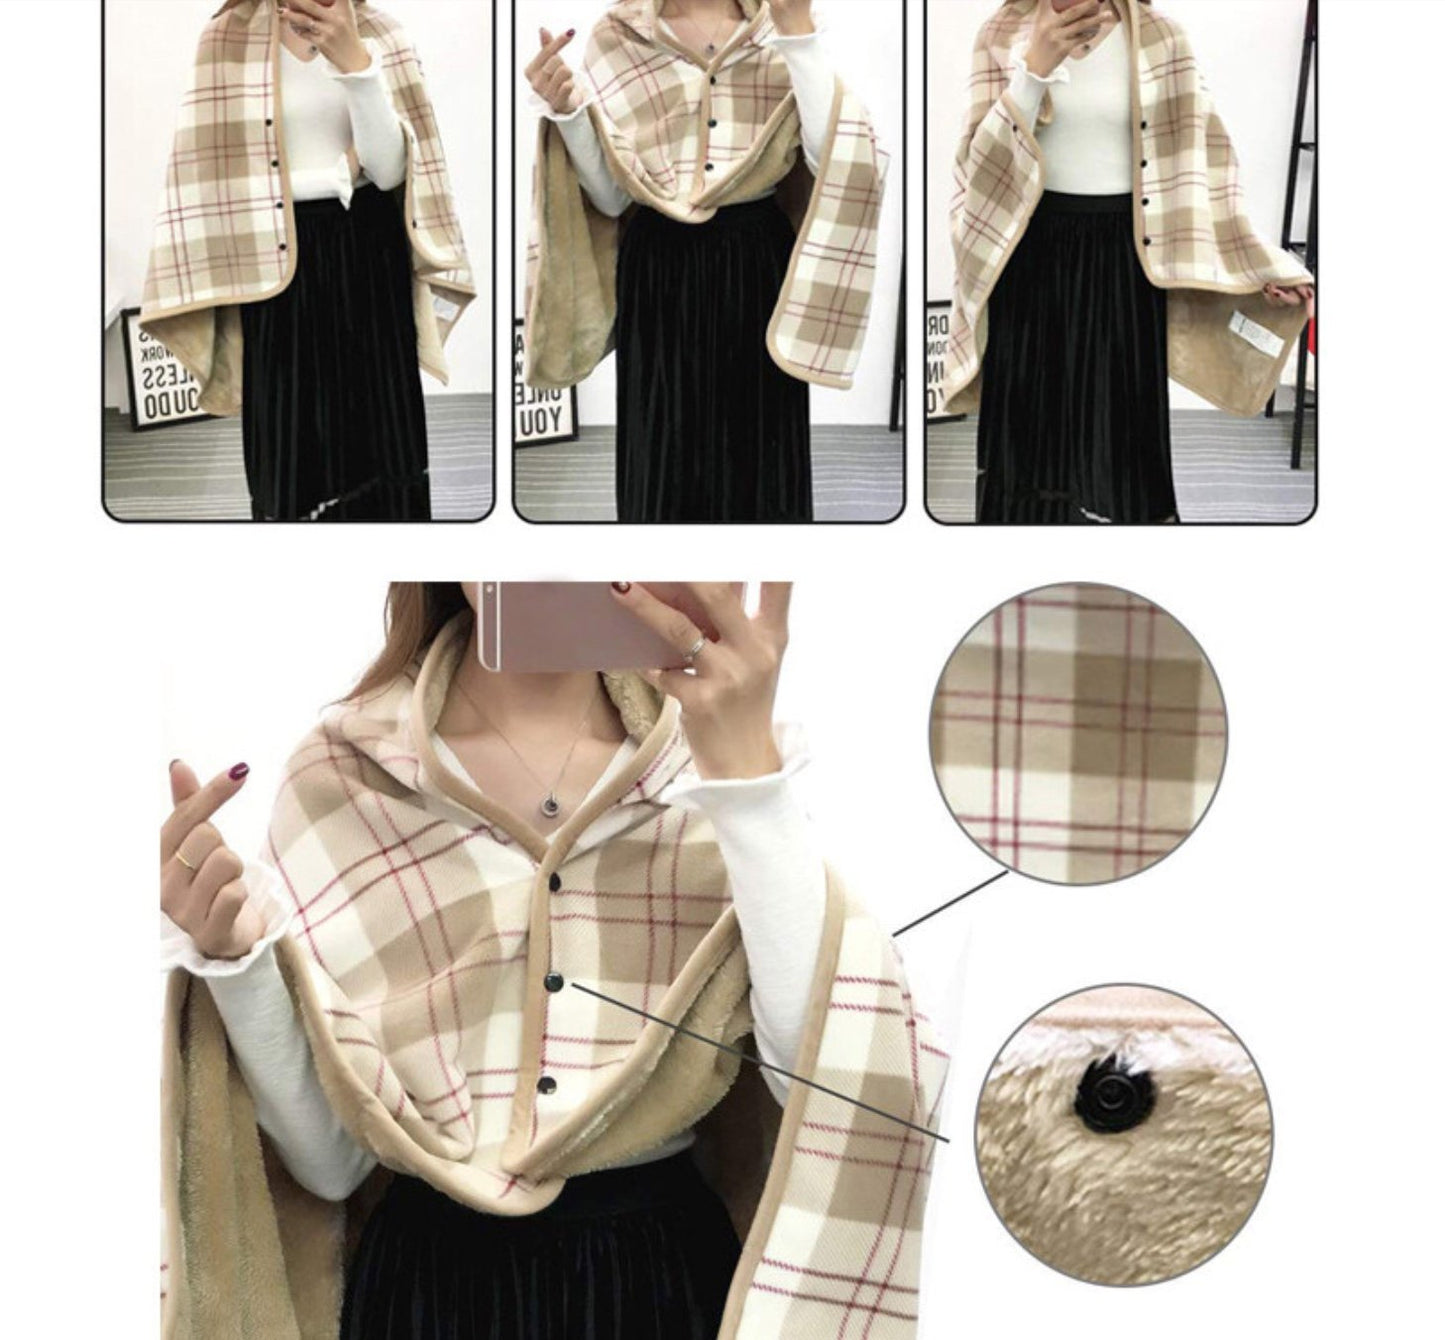 Poncho fleece warm plaid pashmina carmel Color and off white  great gift,next day shipping